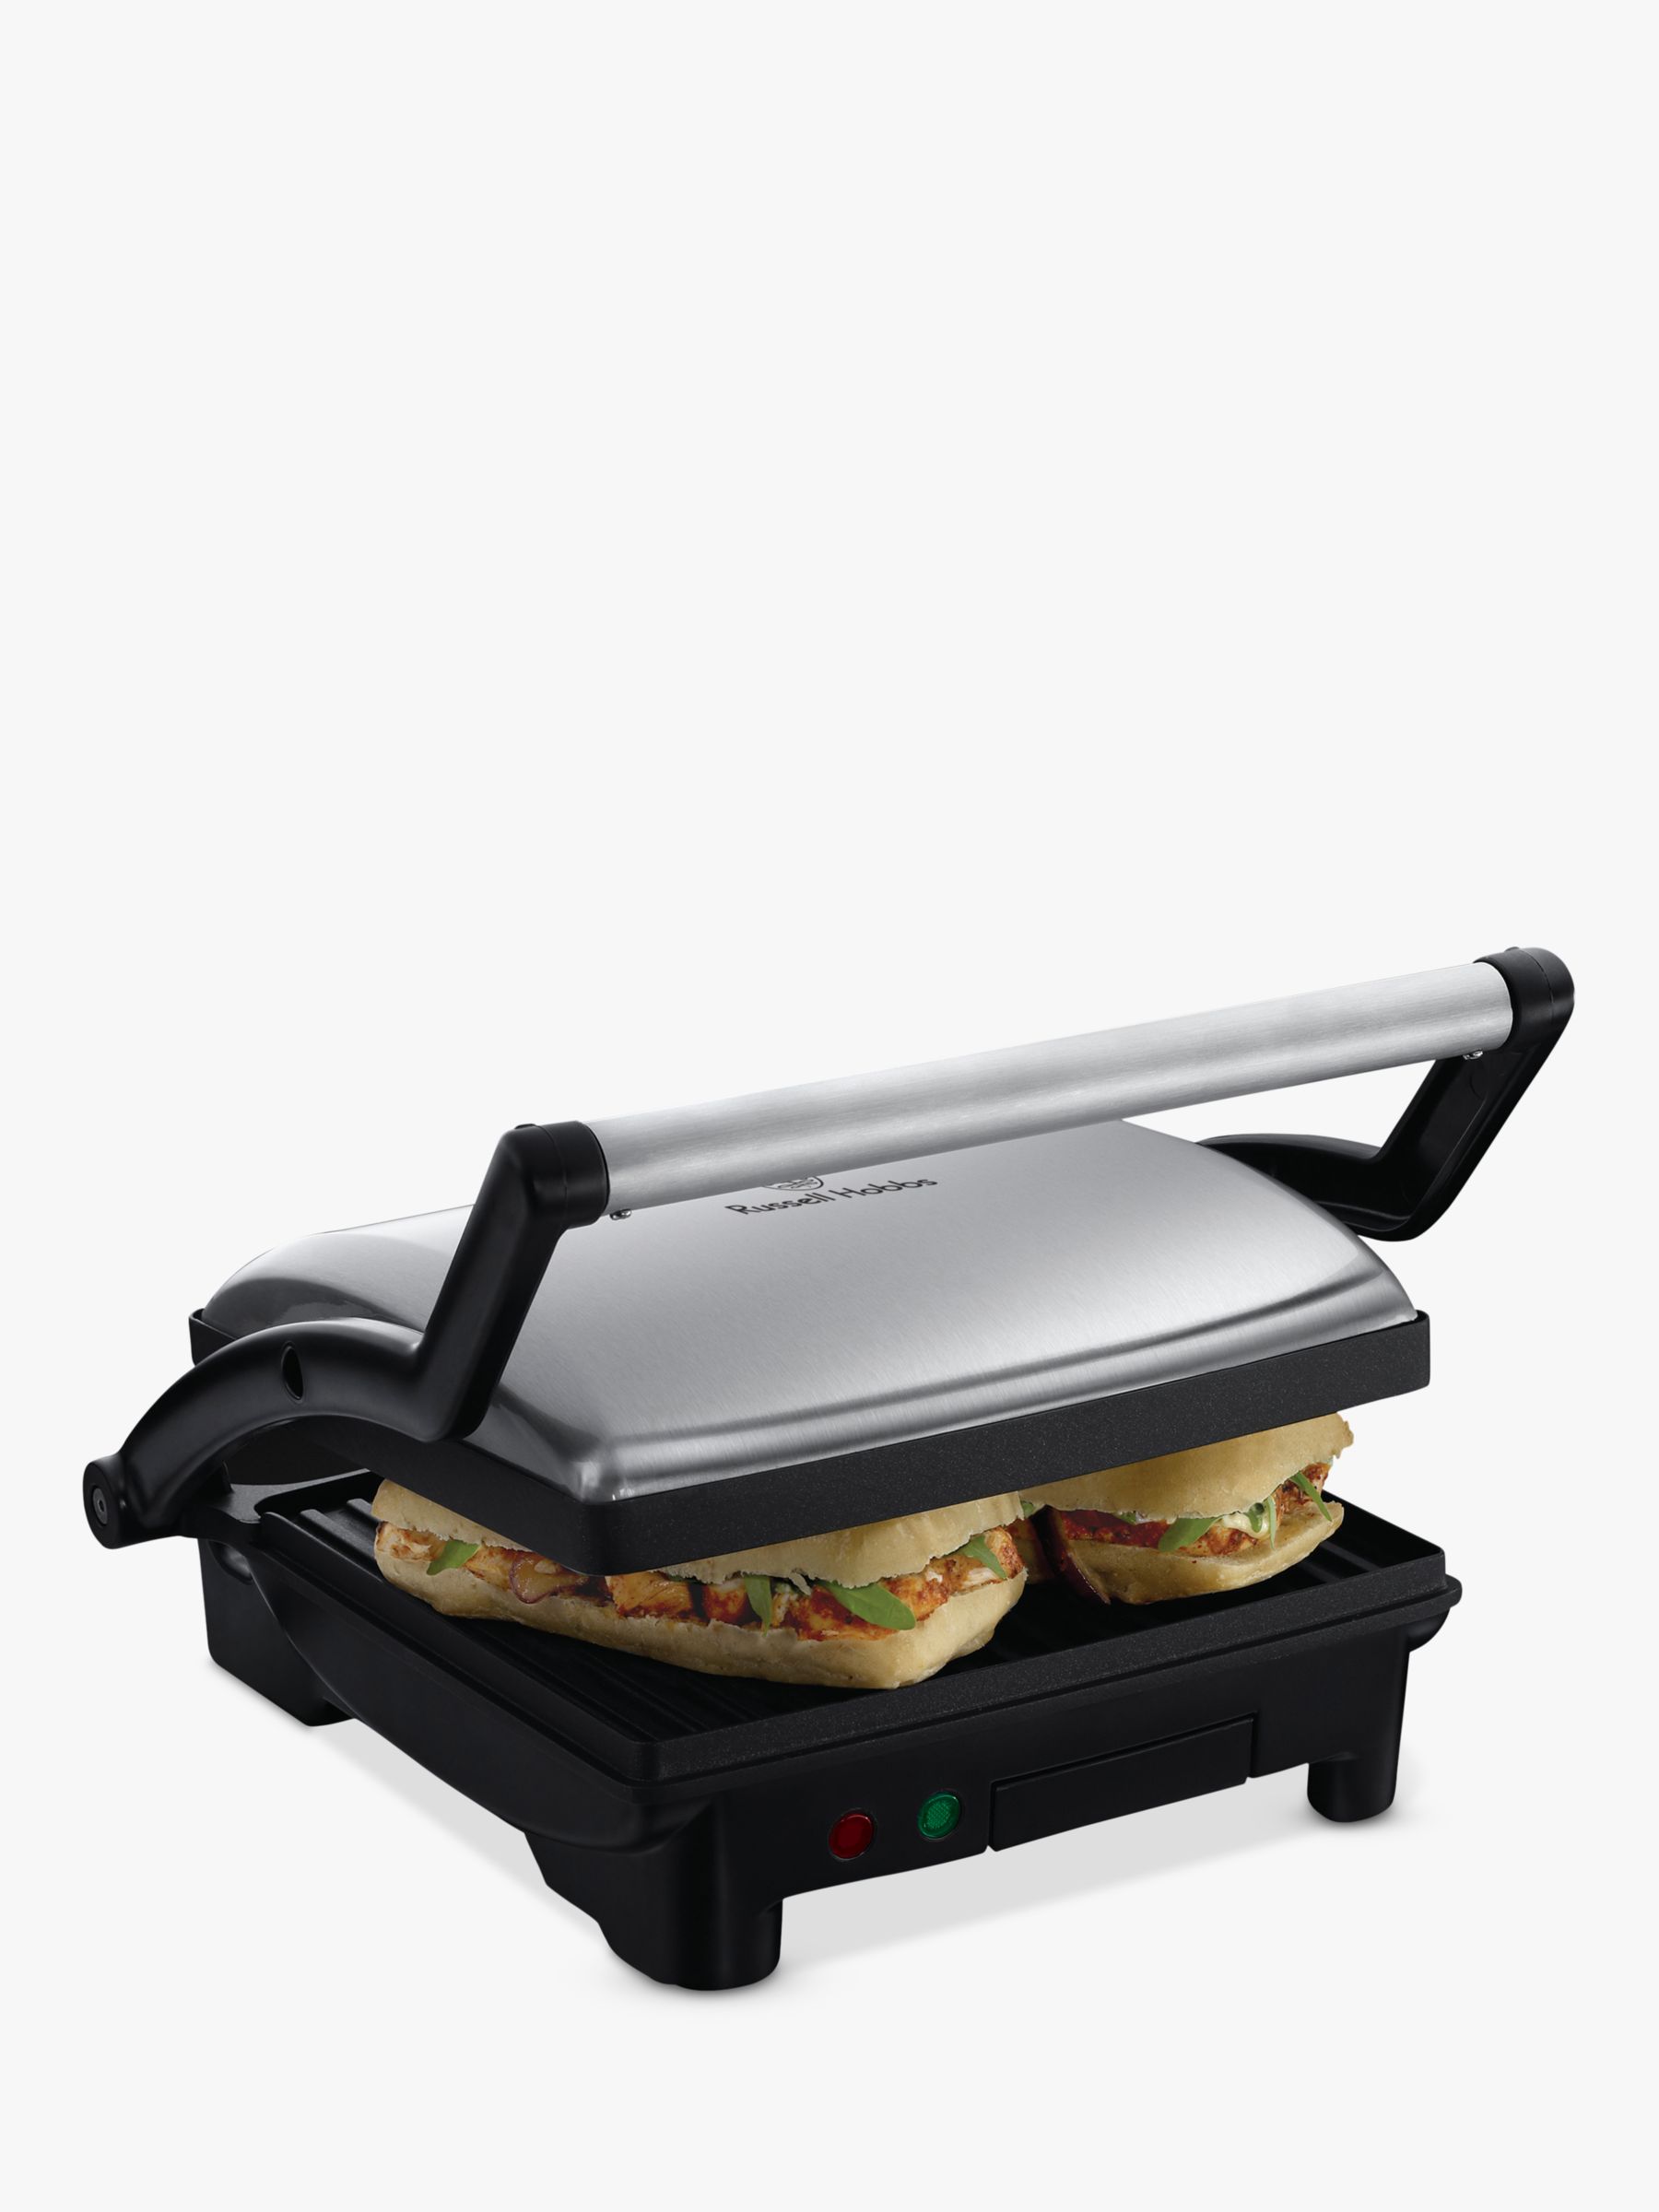 Russell Hobbs Cook at Home 3-in-1 Panini Maker, Grill and Griddle